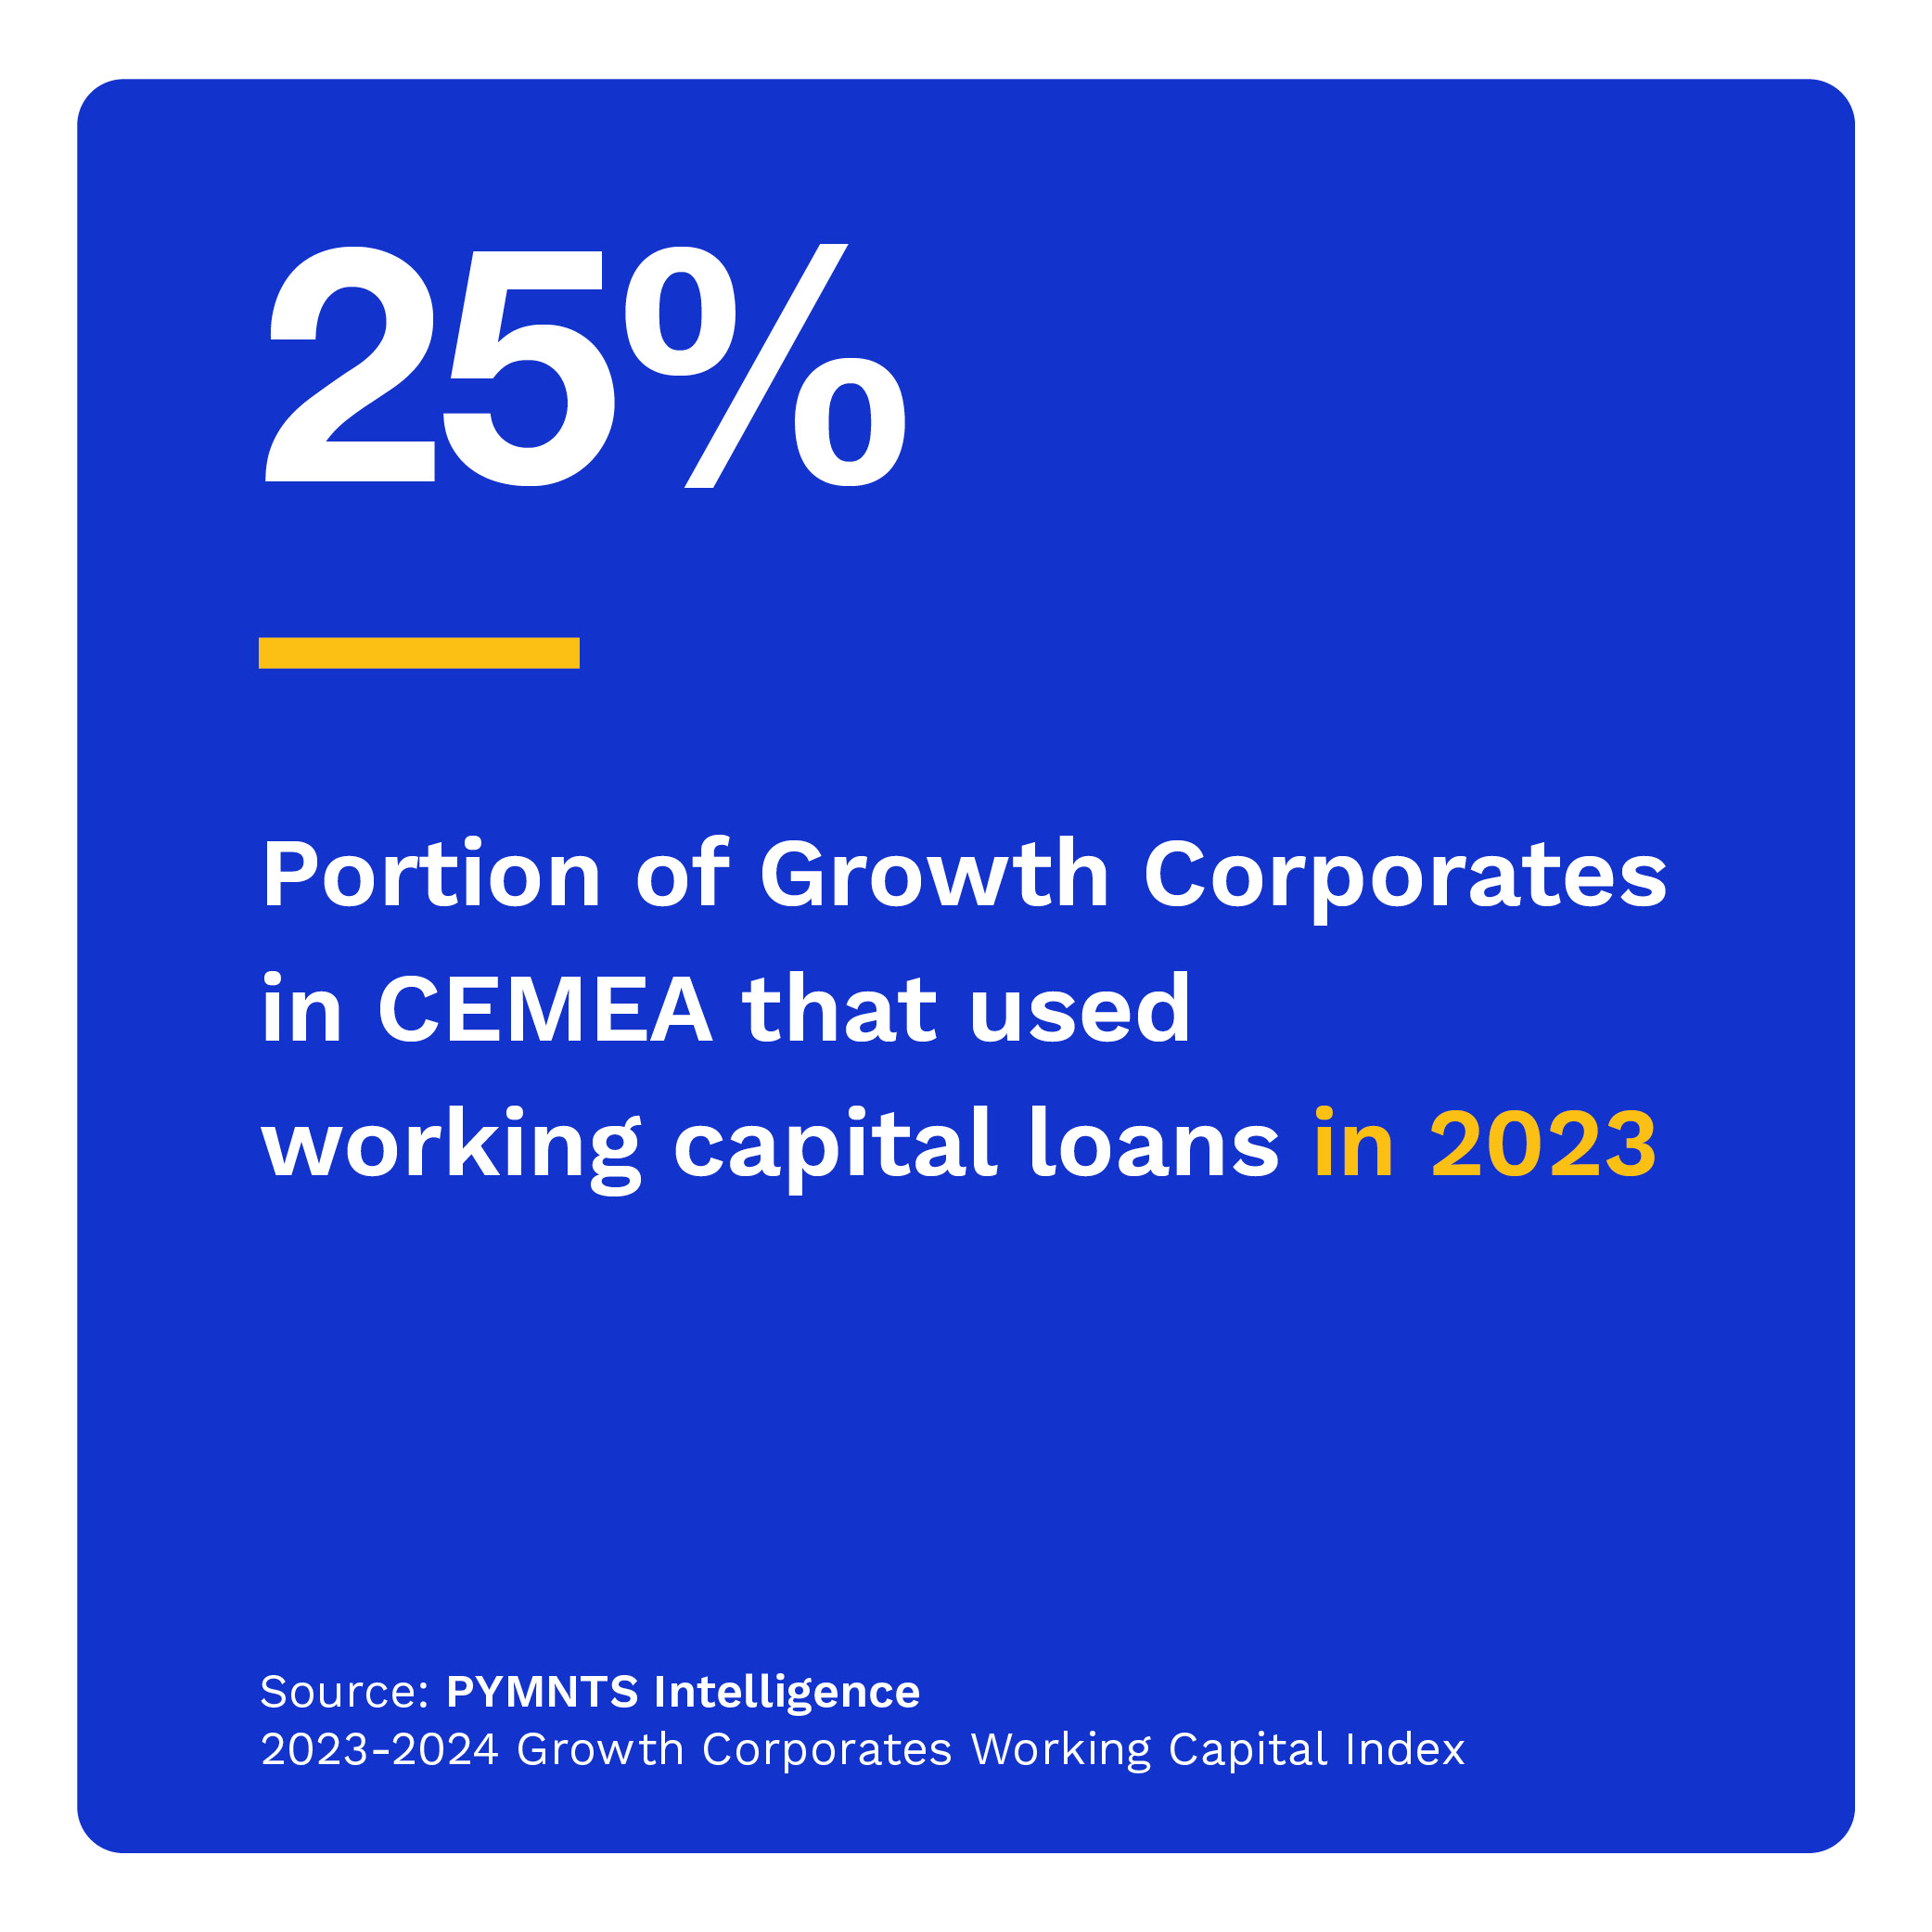 25%: Portion of Growth Corporates in CEMEA that used working capital loans in 2023 